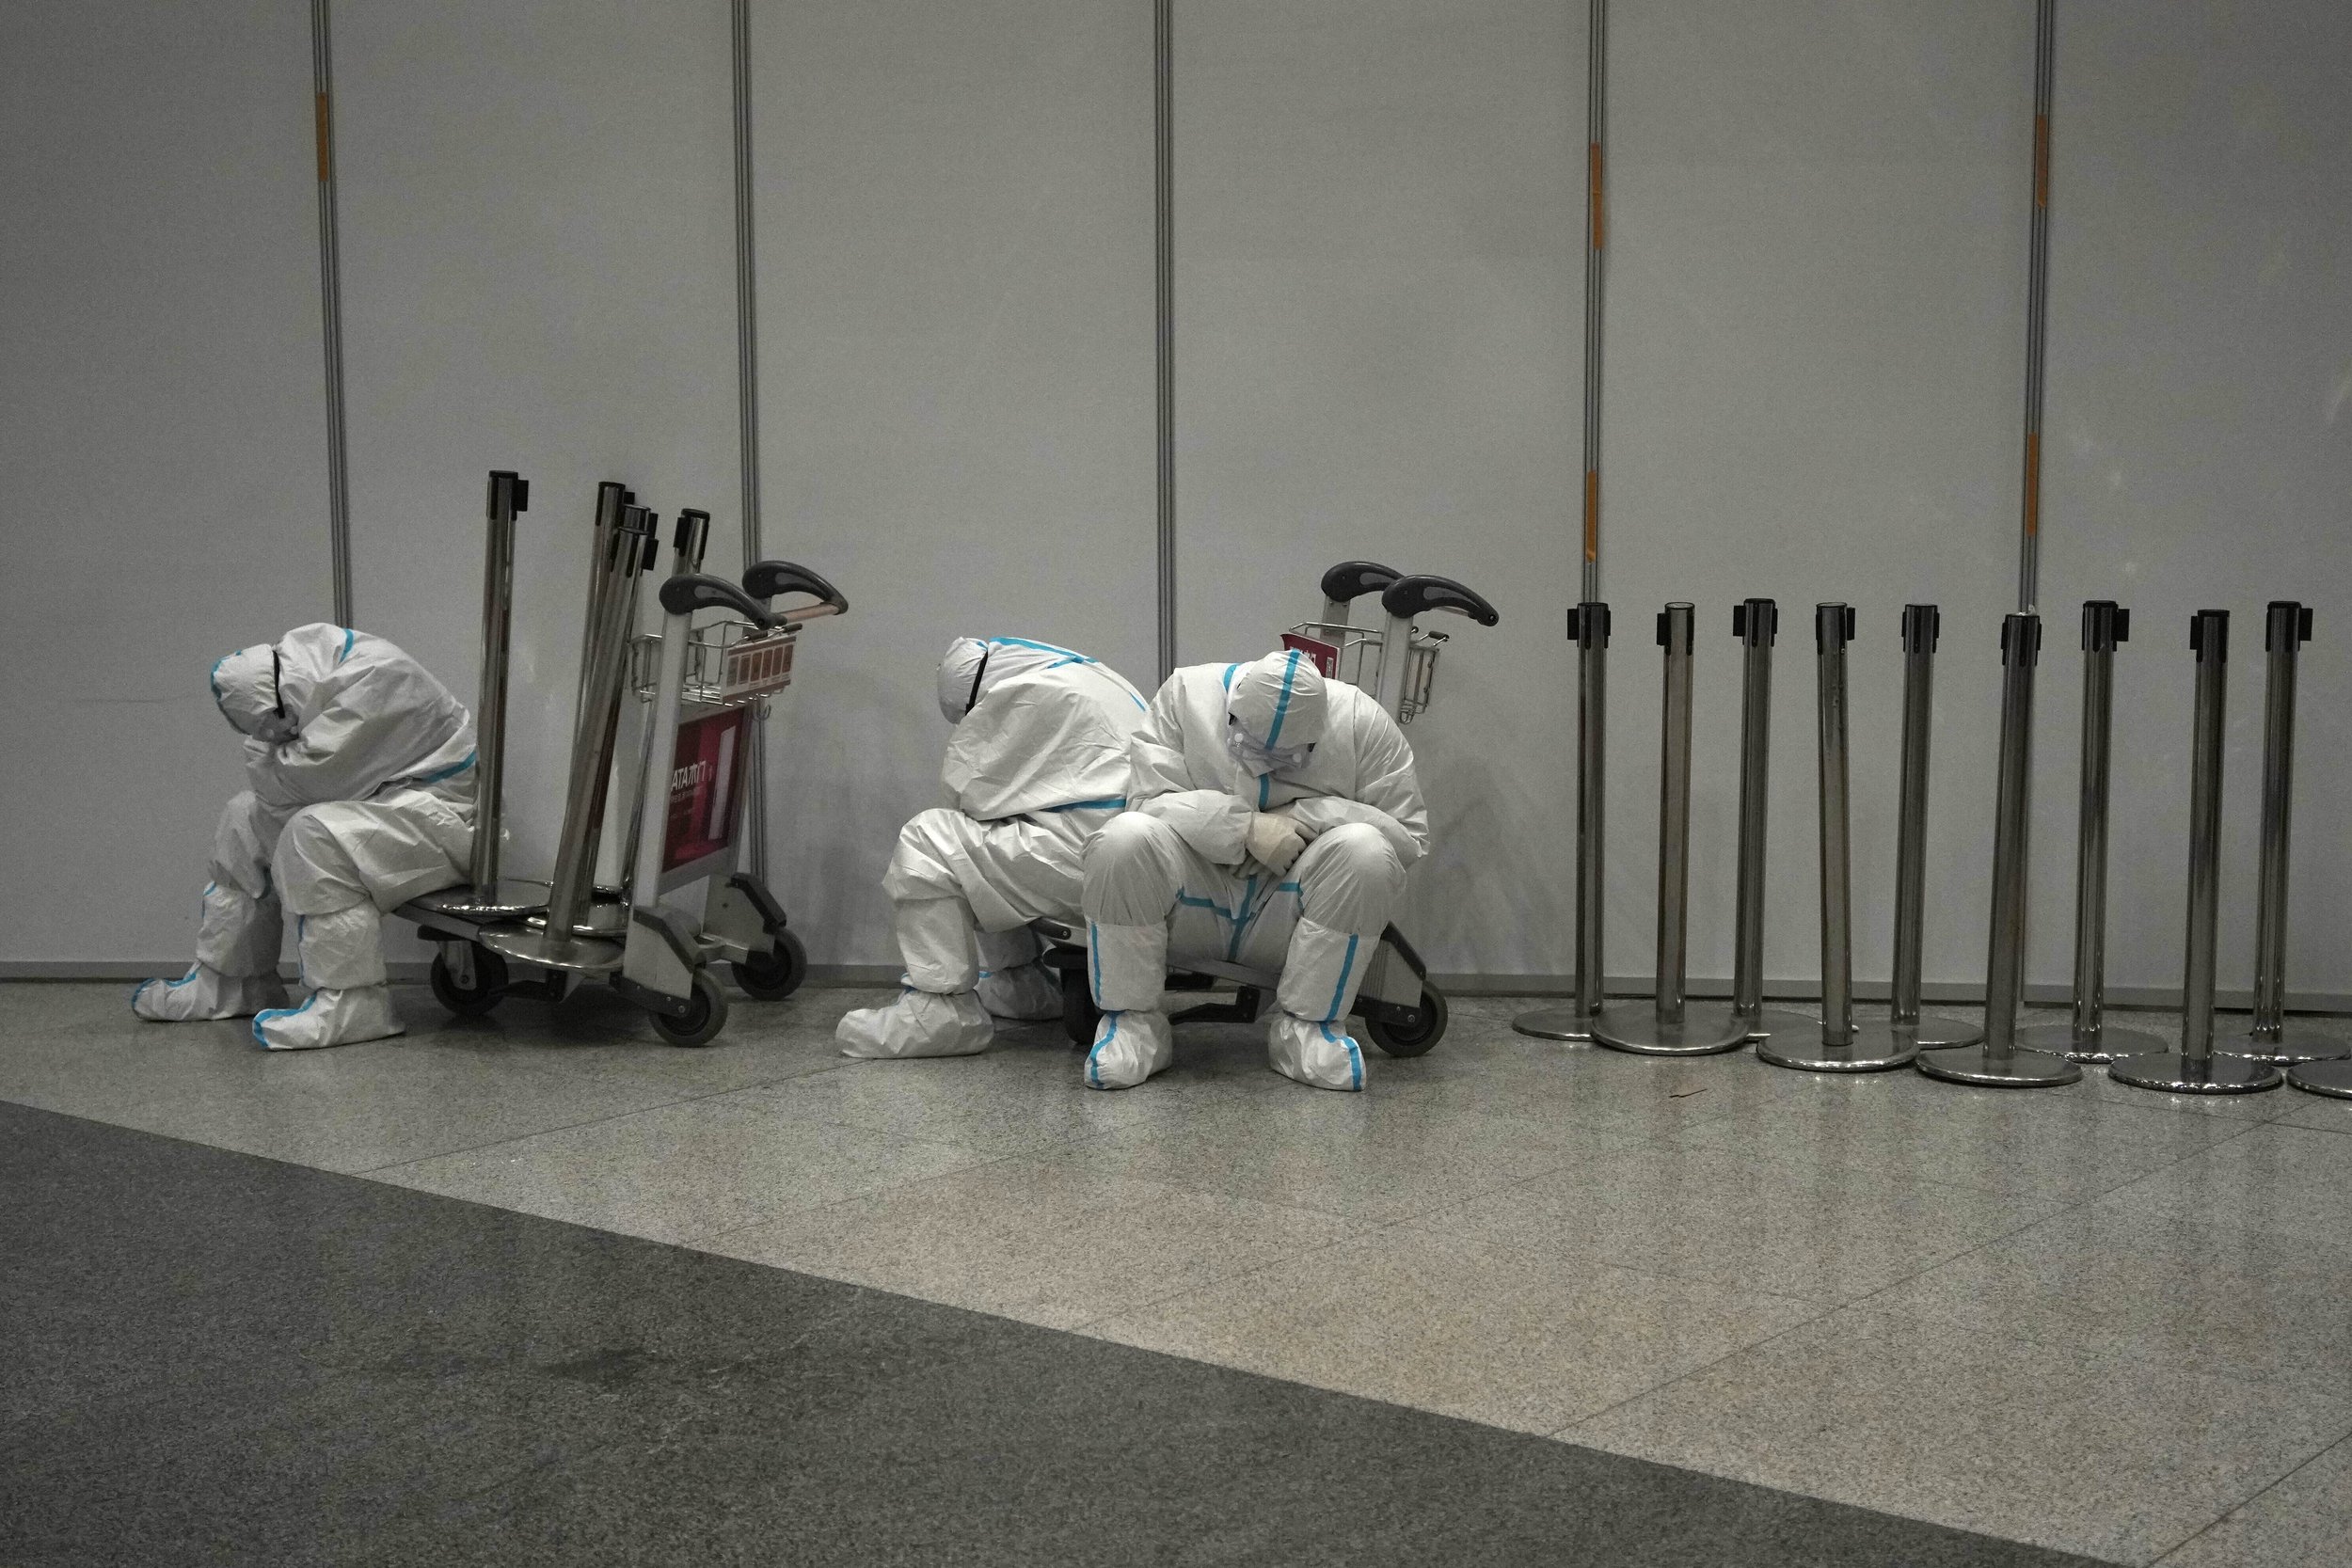  Olympic workers in protective clothing rest after they helped travelers at the Beijing Capital International Airport after the 2022 Winter Olympics, Monday, Feb. 21, 2022, in Beijing, China. (AP Photo/Alessandra Tarantino) 